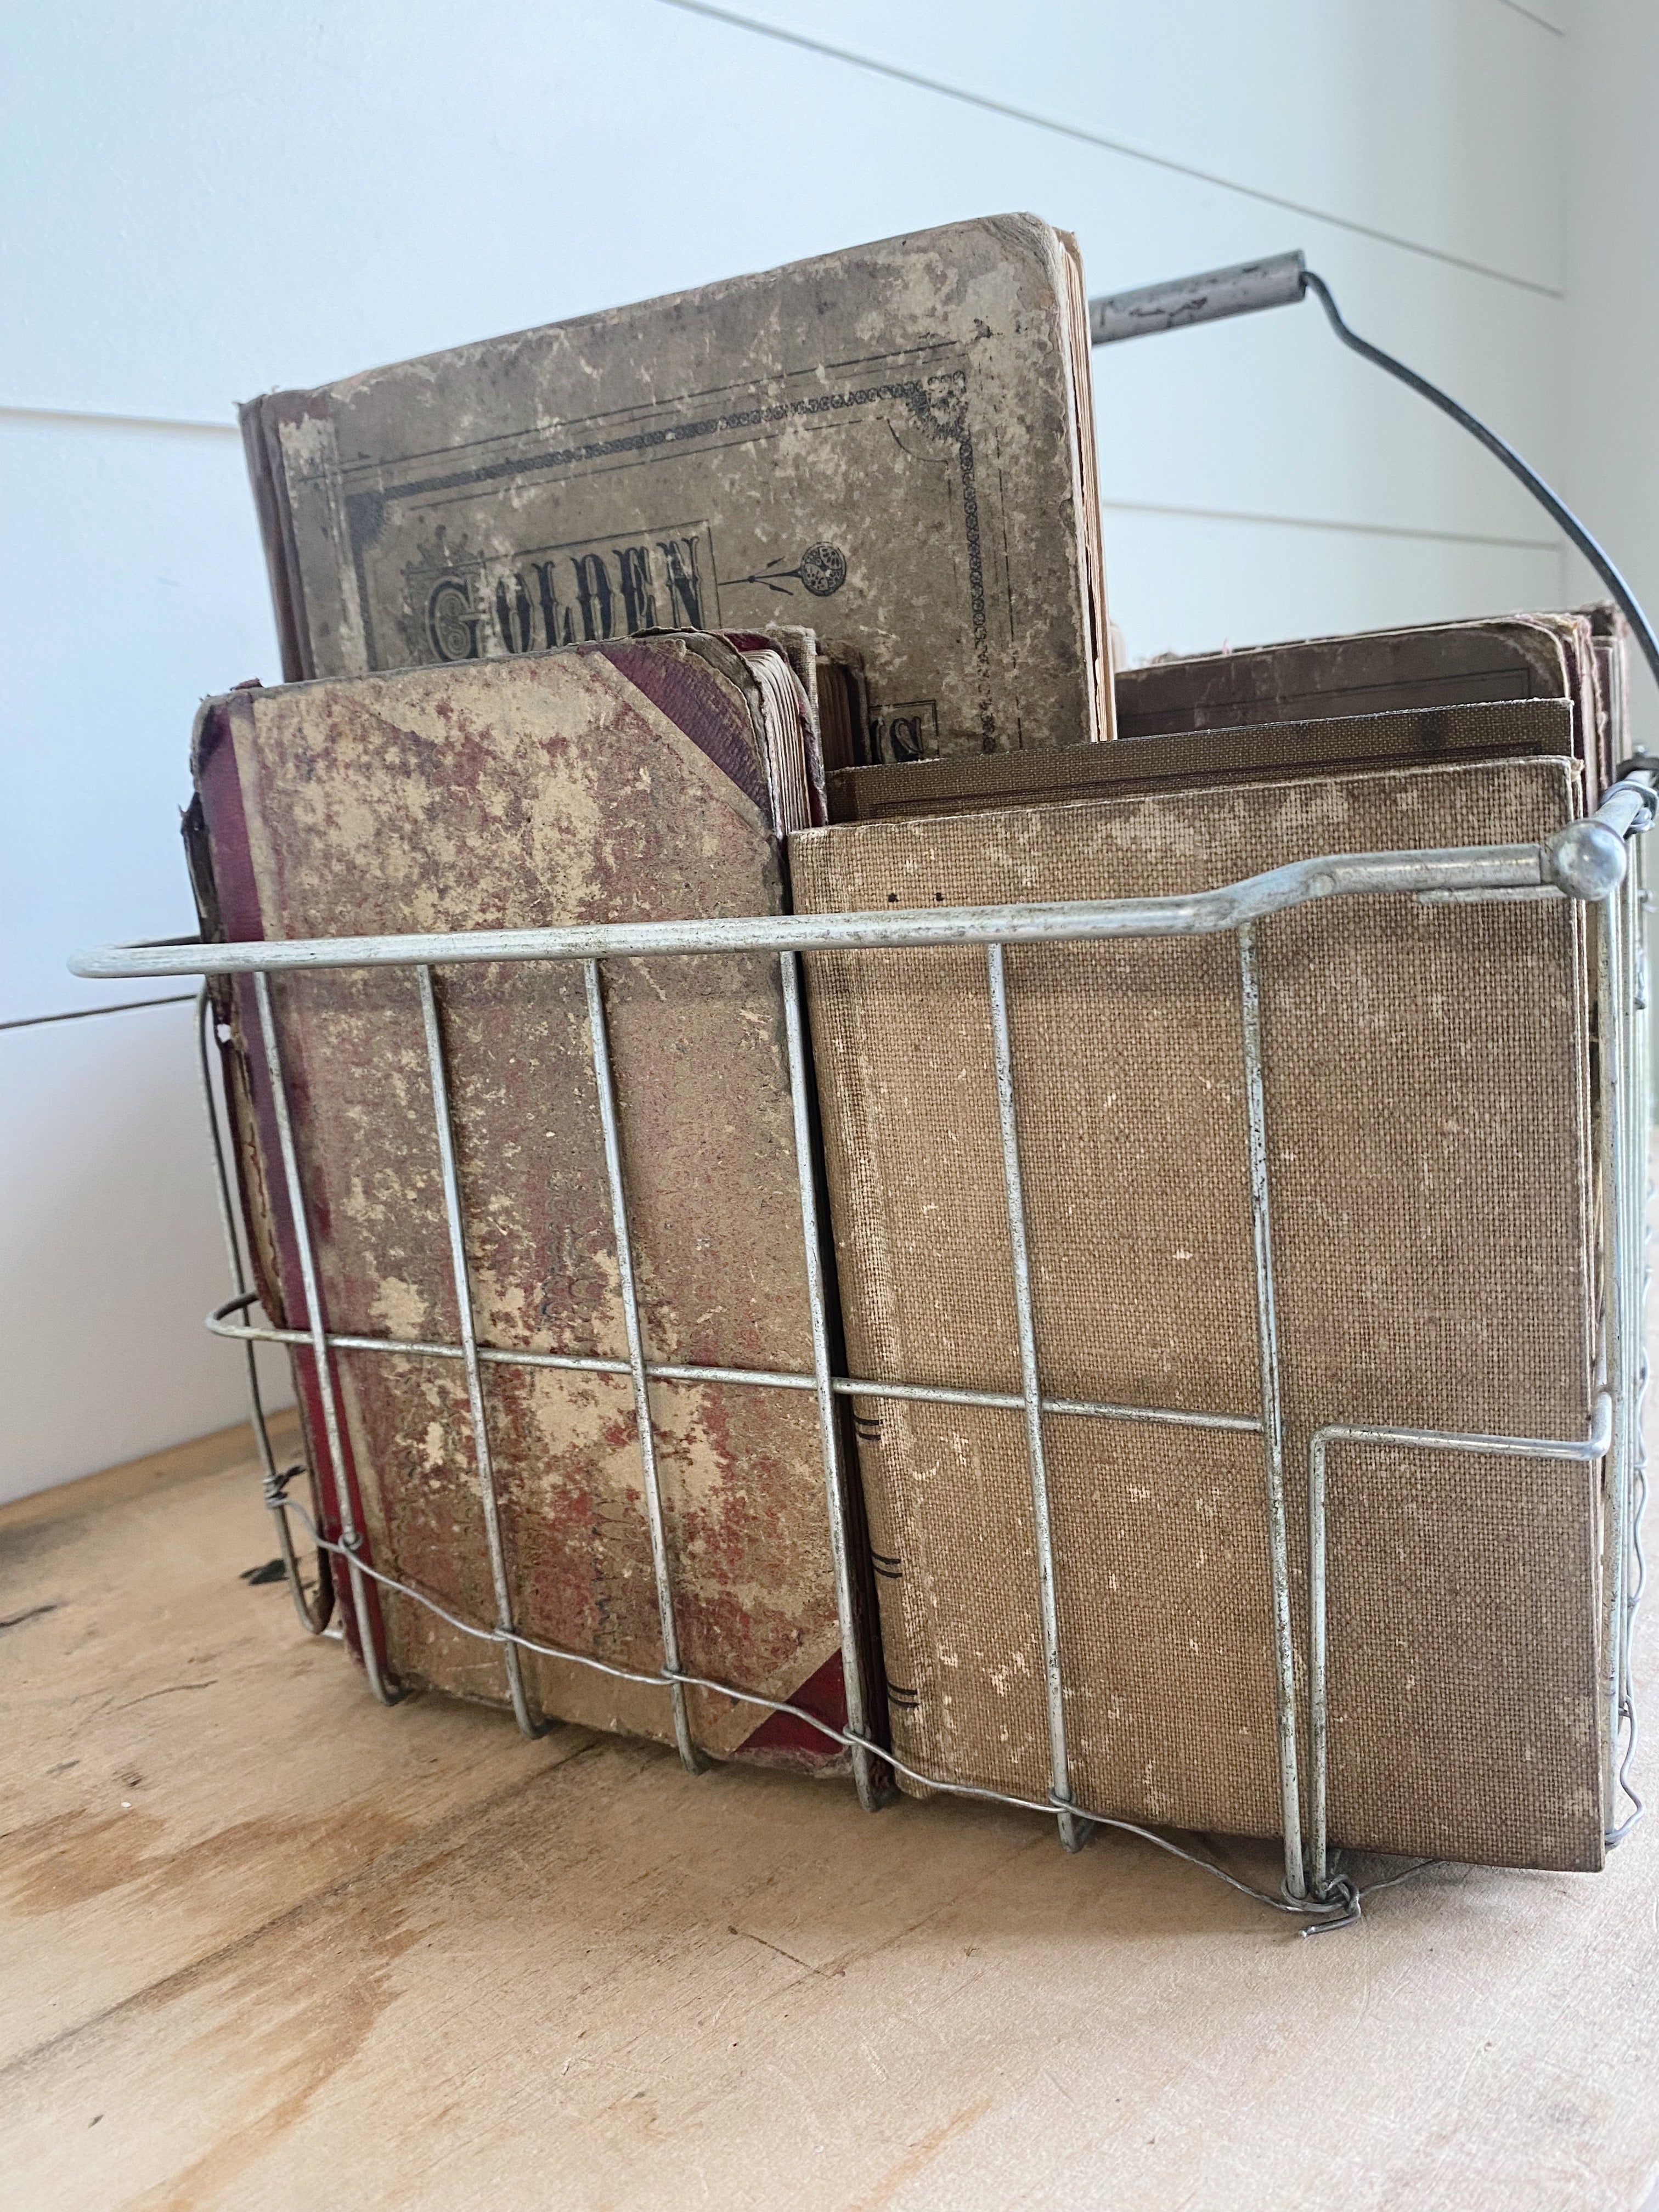 Collection of 35 Vintage & Antique Books in a Vintage Wire Basket